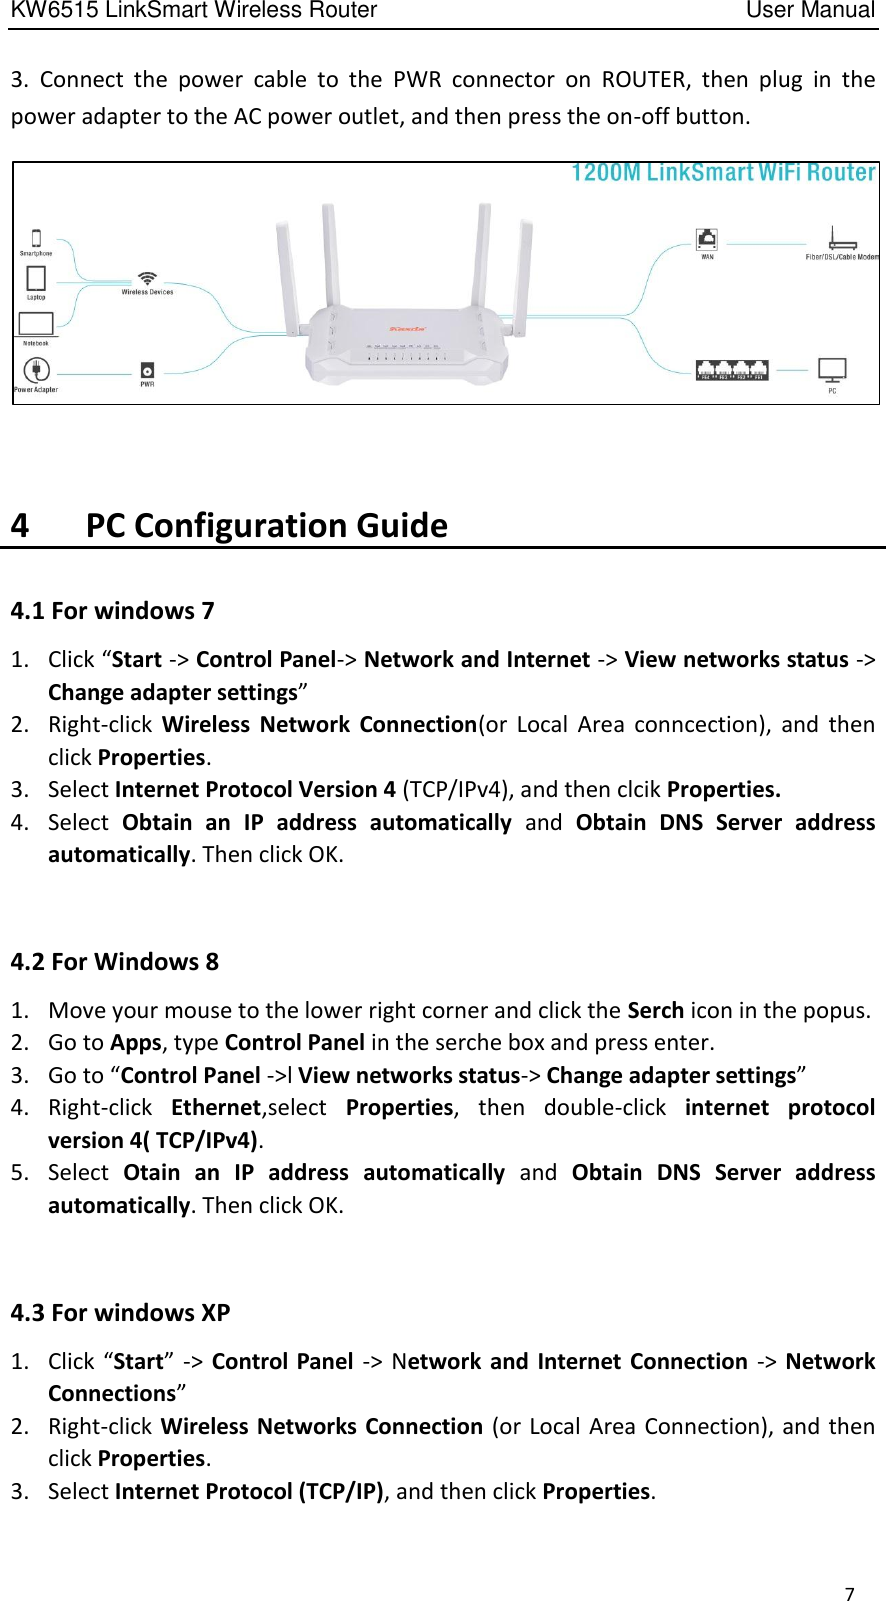 KW6515 LinkSmart Wireless Router         User Manual 7 3.  Connect  the  power  cable  to  the  PWR  connector  on  ROUTER,  then plug  in  the power adapter to the AC power outlet, and then press the on-off button.   4      PC Configuration Guide 4.1 For windows 7 1. Click “Start -&gt; Control Panel-&gt; Network and Internet -&gt; View networks status -&gt; Change adapter settings” 2. Right-click  Wireless  Network  Connection(or  Local  Area  conncection),  and  then click Properties. 3. Select Internet Protocol Version 4 (TCP/IPv4), and then clcik Properties. 4. Select  Obtain  an  IP  address  automatically  and  Obtain  DNS  Server  address automatically. Then click OK.  4.2 For Windows 8   1. Move your mouse to the lower right corner and click the Serch icon in the popus. 2. Go to Apps, type Control Panel in the serche box and press enter. 3. Go to “Control Panel -&gt;l View networks status-&gt; Change adapter settings” 4. Right-click  Ethernet,select  Properties,  then  double-click  internet  protocol version 4( TCP/IPv4). 5. Select  Otain  an  IP  address  automatically  and  Obtain  DNS  Server  address automatically. Then click OK.  4.3 For windows XP 1. Click “Start”  -&gt;  Control Panel  -&gt;  Network and  Internet Connection  -&gt; Network Connections” 2. Right-click Wireless Networks Connection (or Local Area Connection), and then click Properties. 3. Select Internet Protocol (TCP/IP), and then click Properties. 